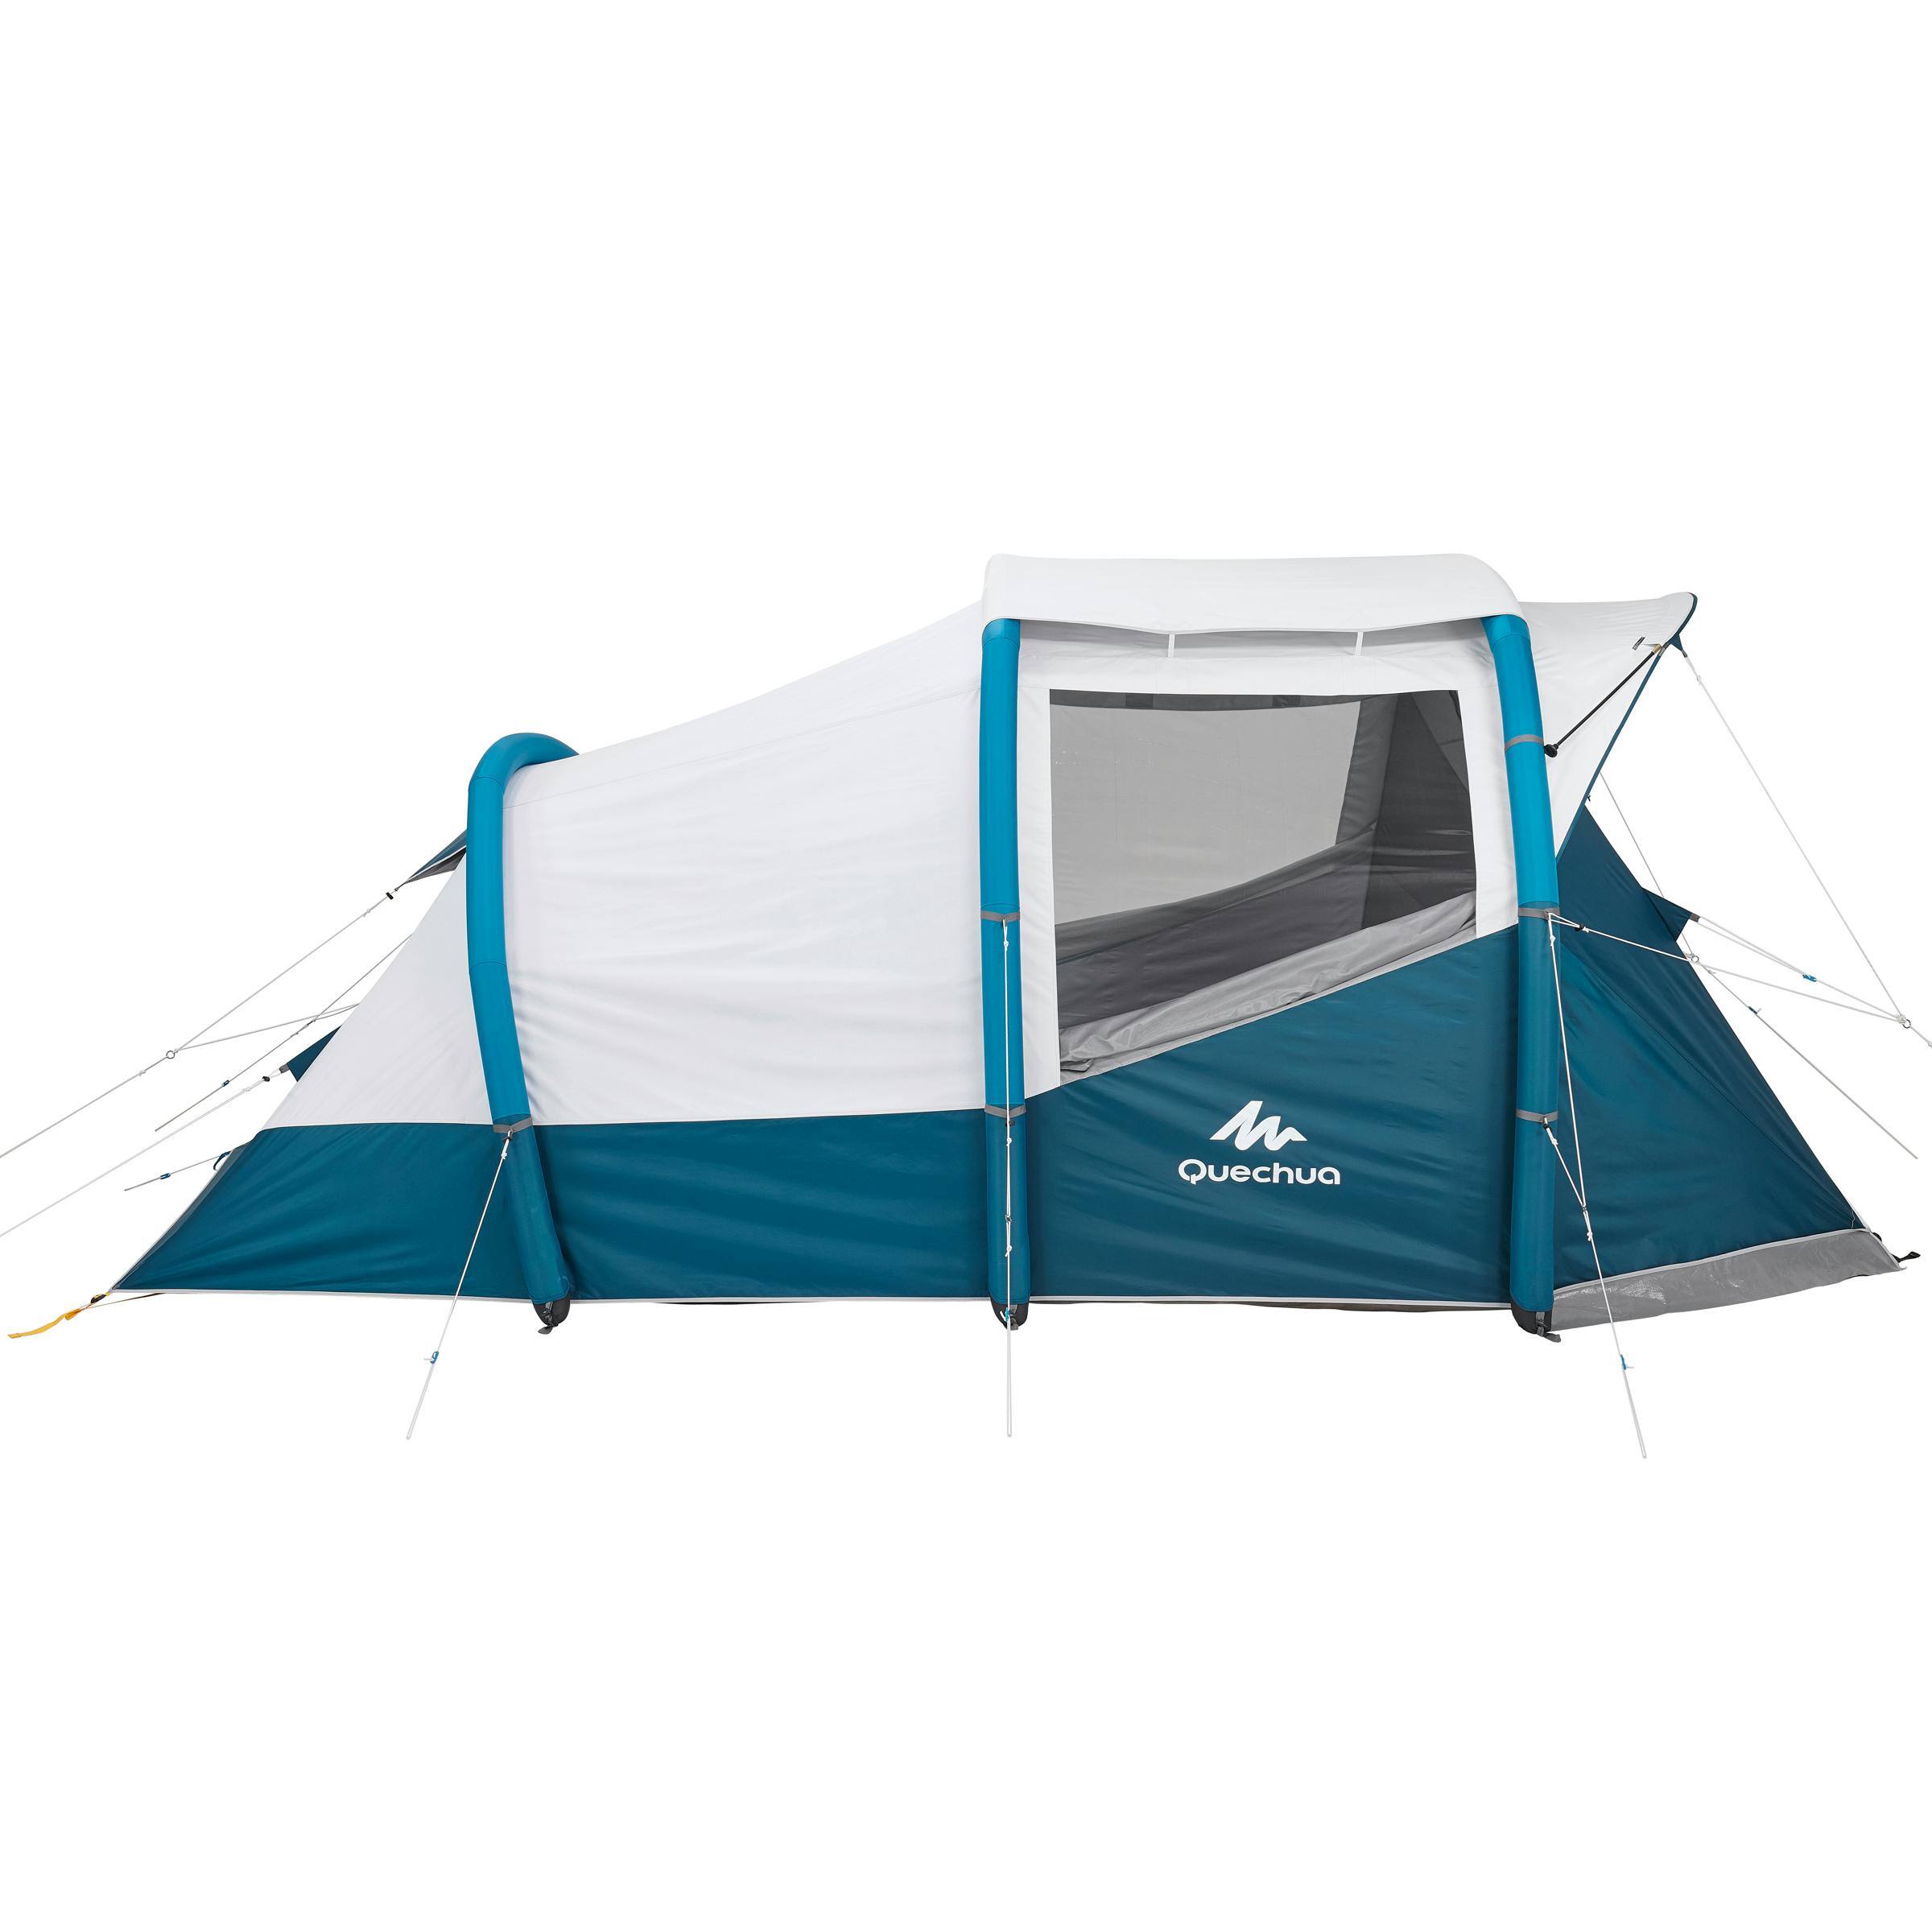 Decathlon Air Seconds 4.1 Family Inflatable Tent